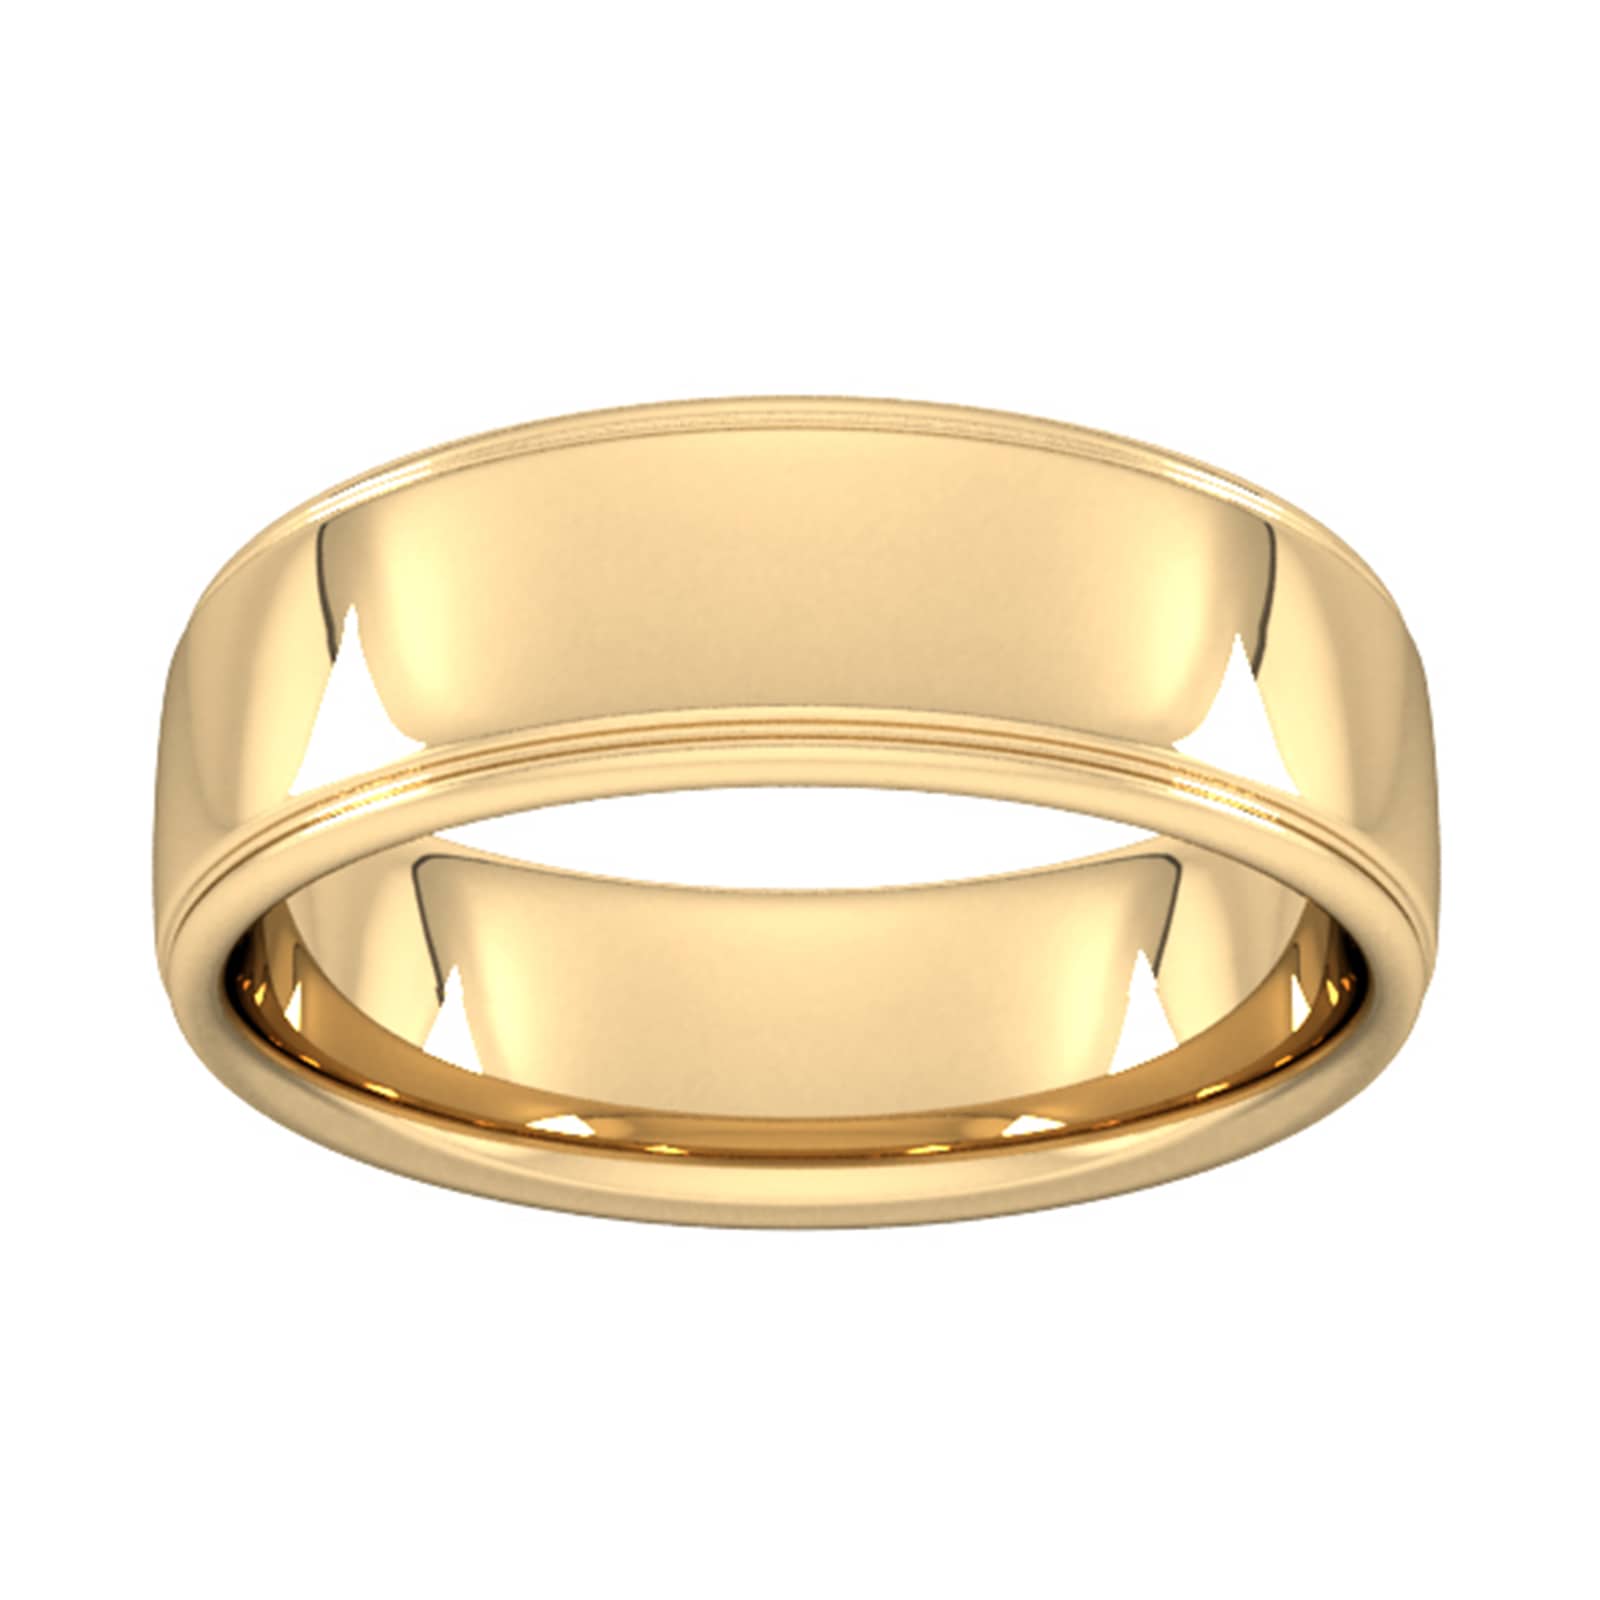 7mm Slight Court Standard Polished Finish With Grooves Wedding Ring In 18 Carat Yellow Gold - Ring Size R